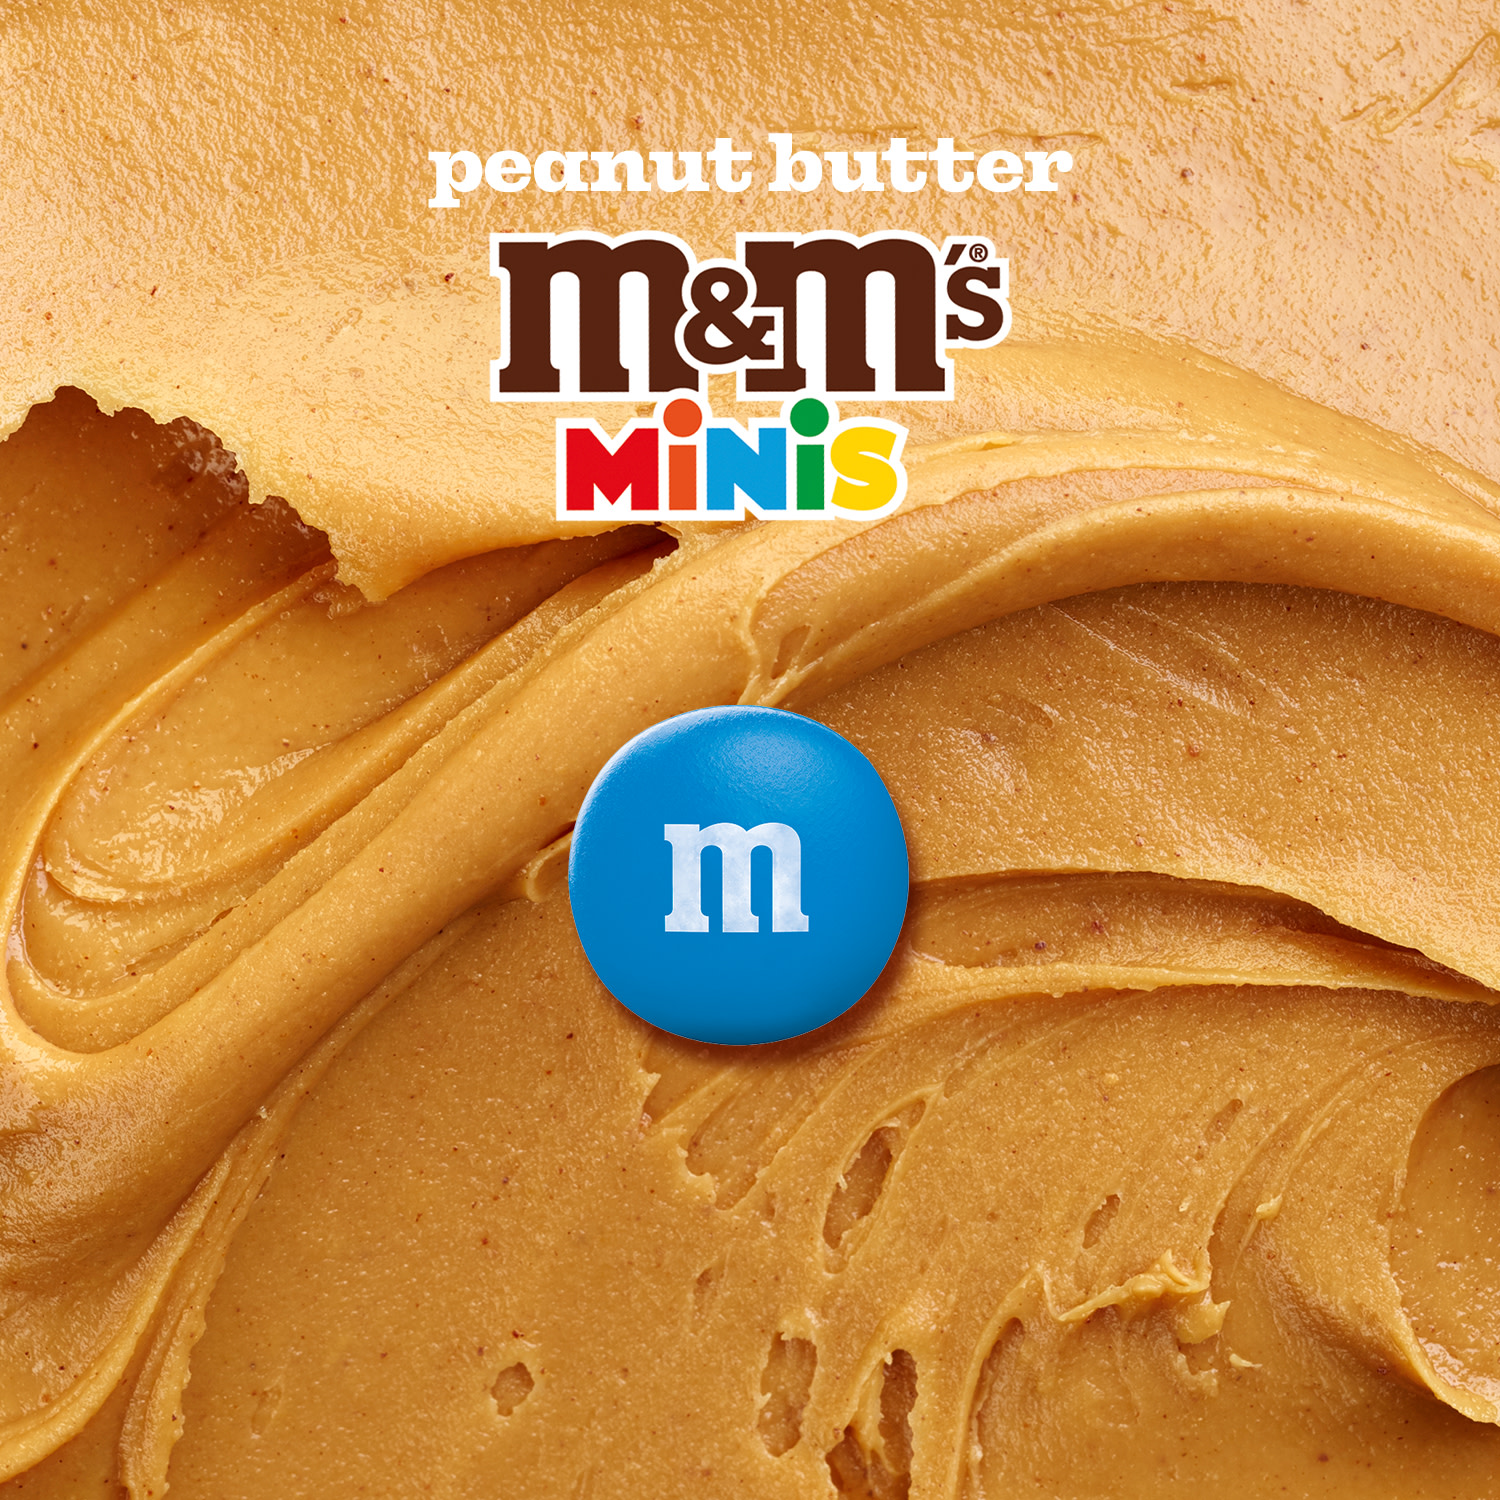 M&M's Minis Peanut Butter Milk Chocolate Candy - 1.74 Oz Mega Tube (Packaging May Vary) - image 3 of 15